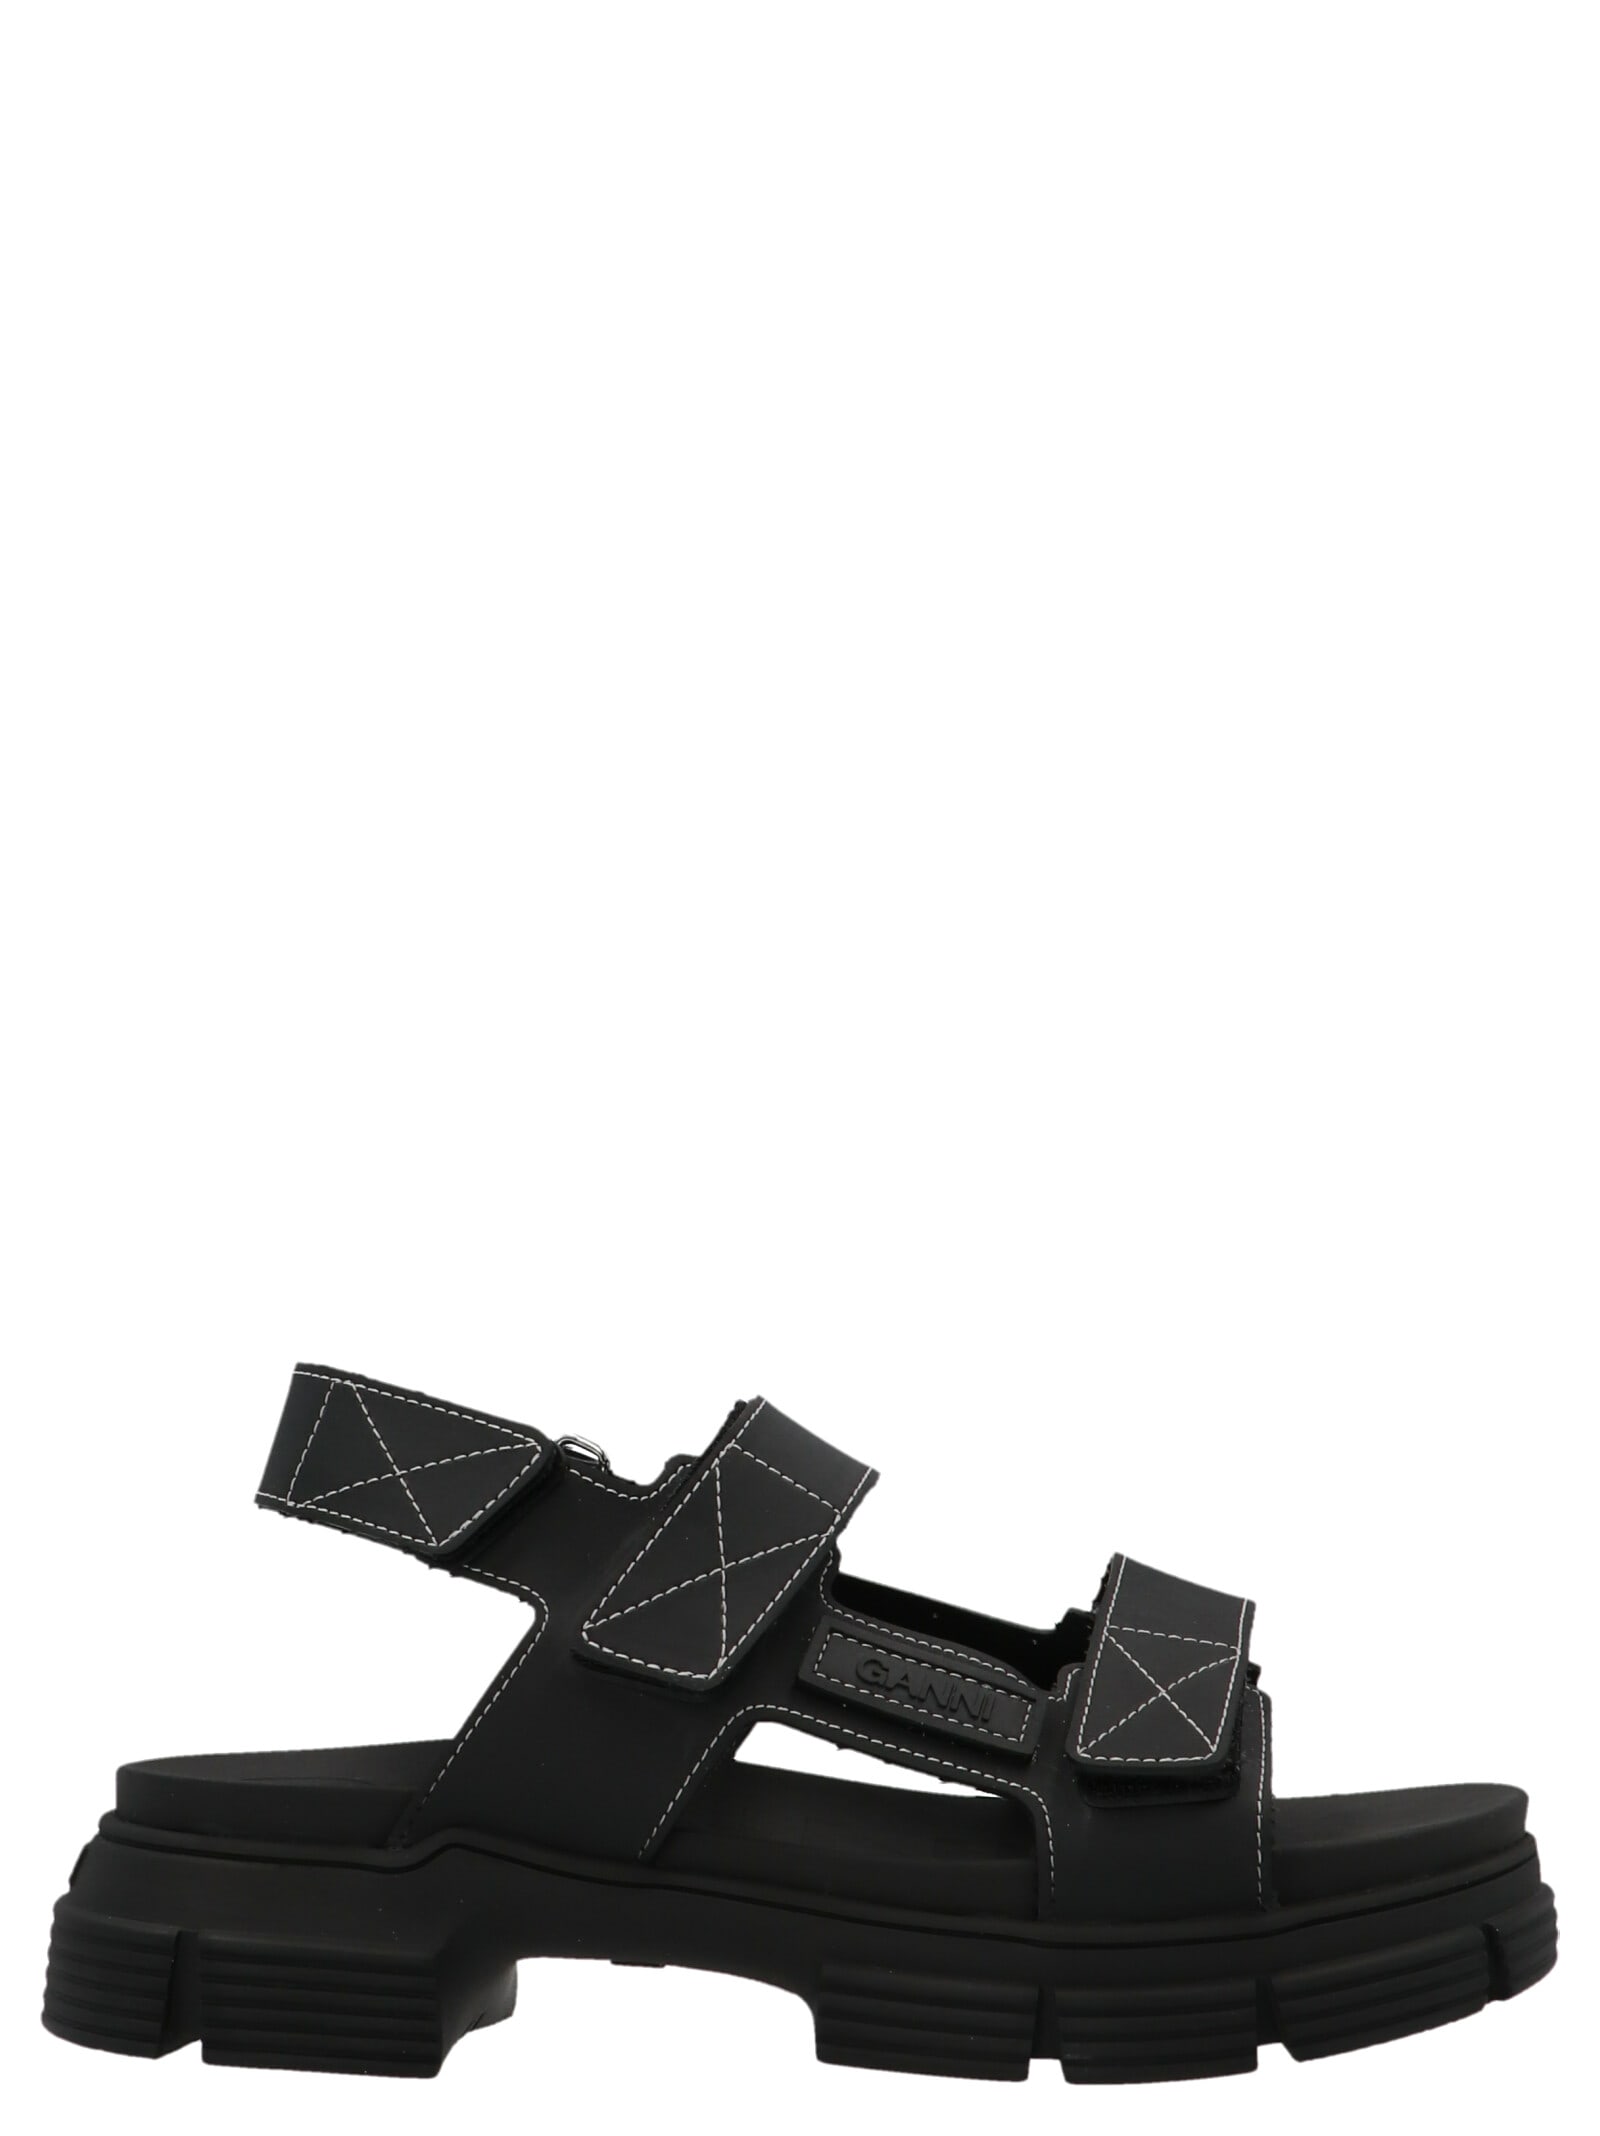 Ganni Recycled Rubber Sandals